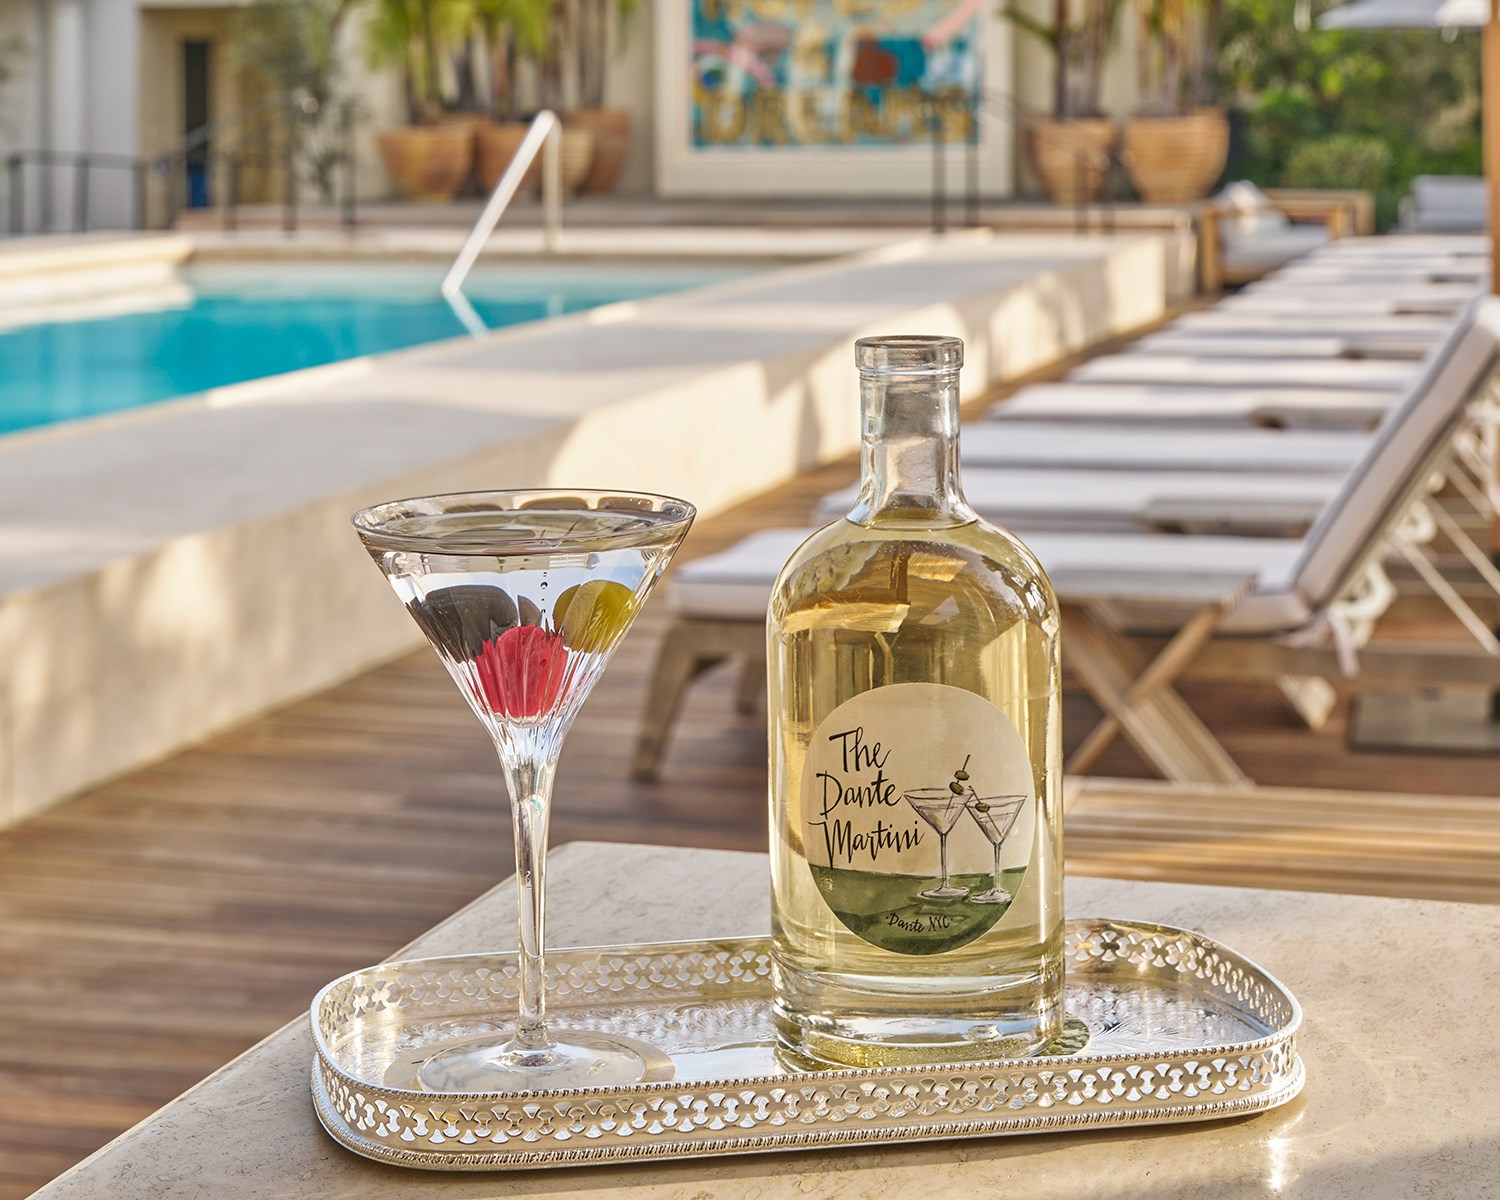 Martini on a silver tray with swimming pool in the background